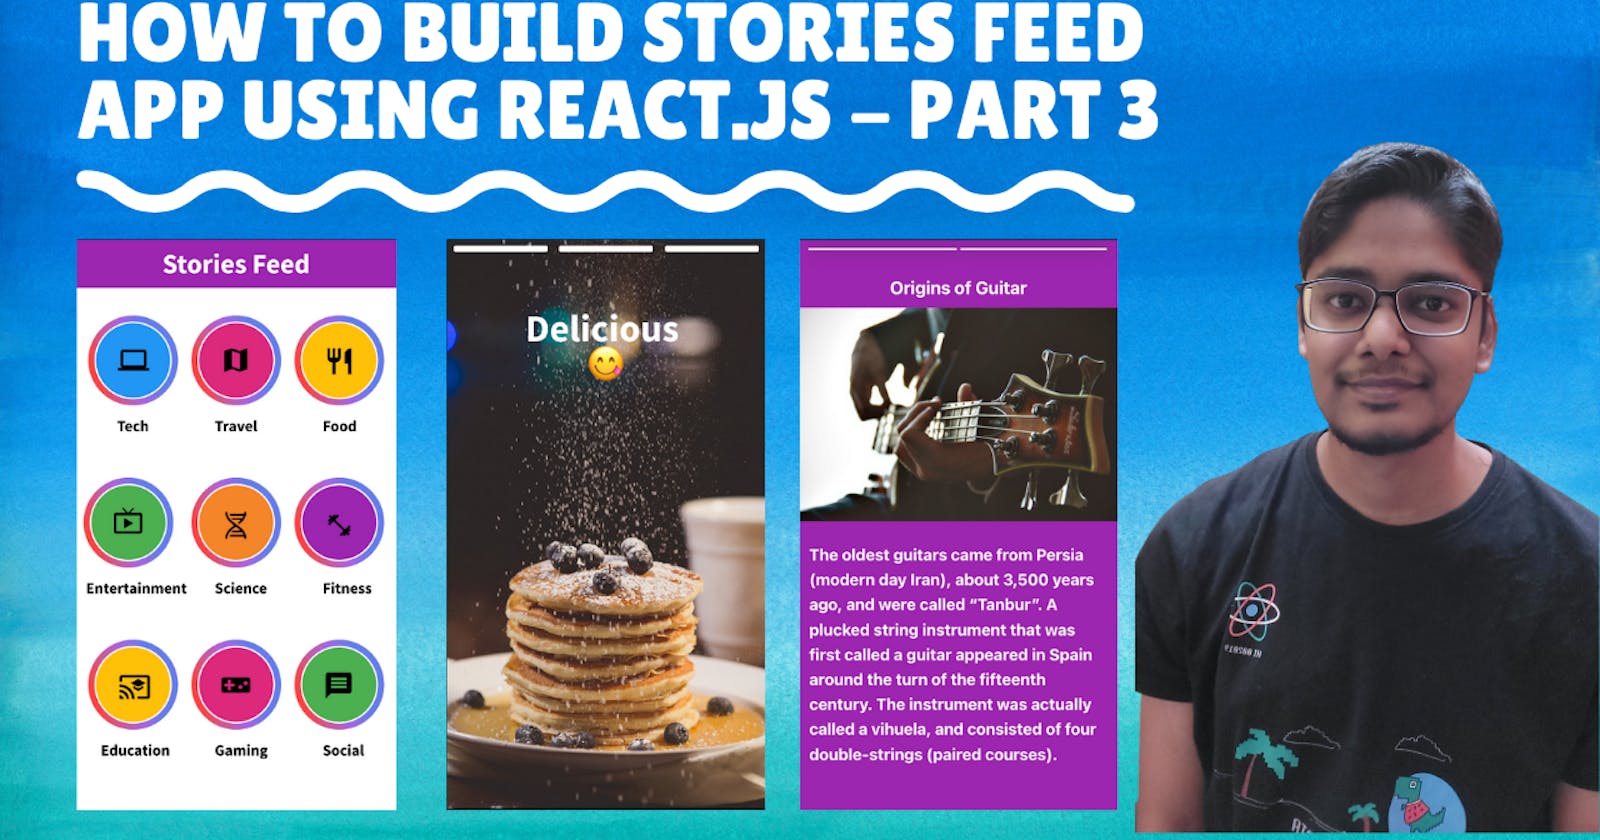 Build stories feed app using react.js - Part 3